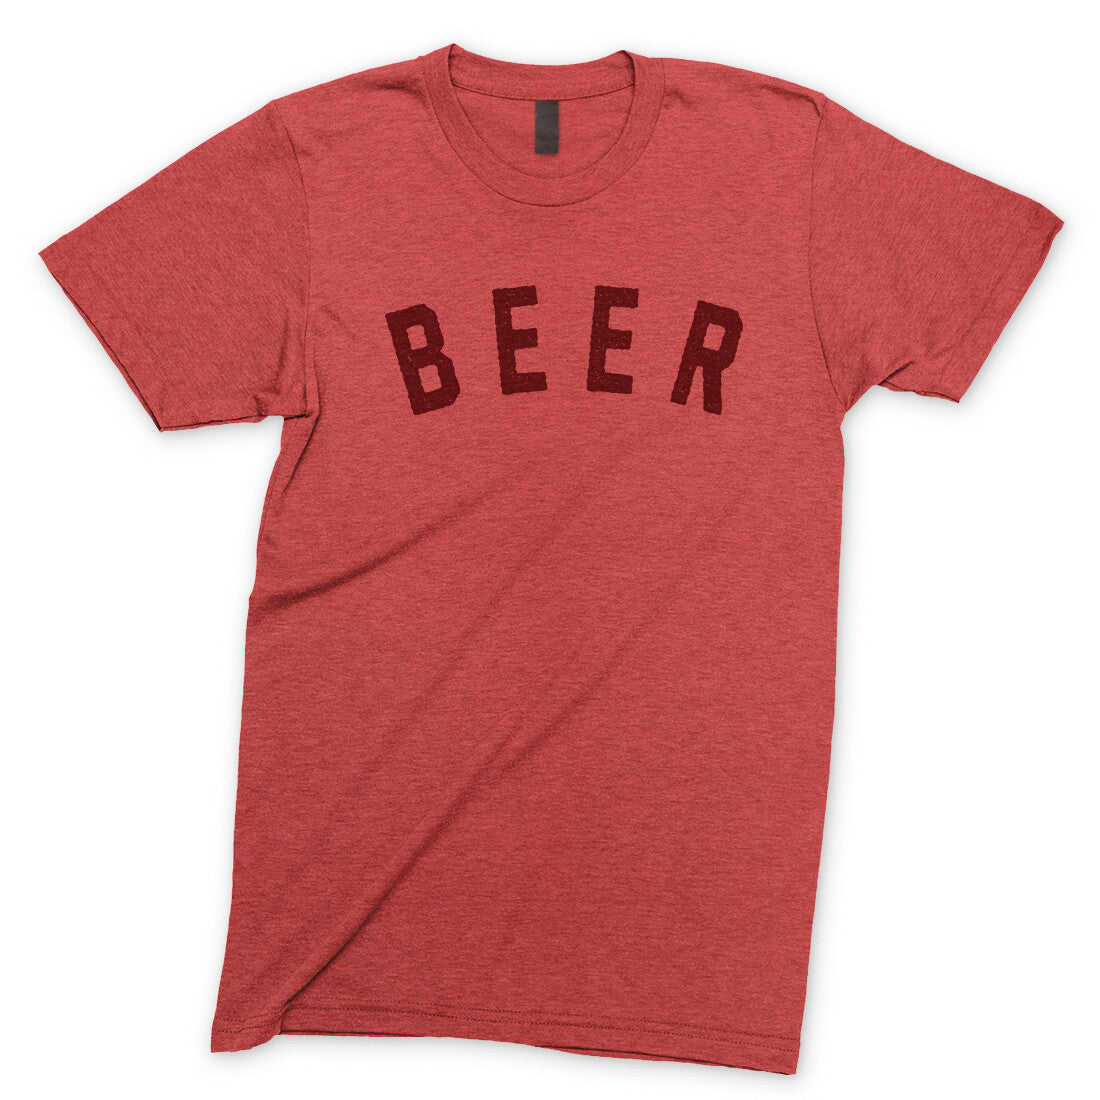 Beer in Heather Red Color